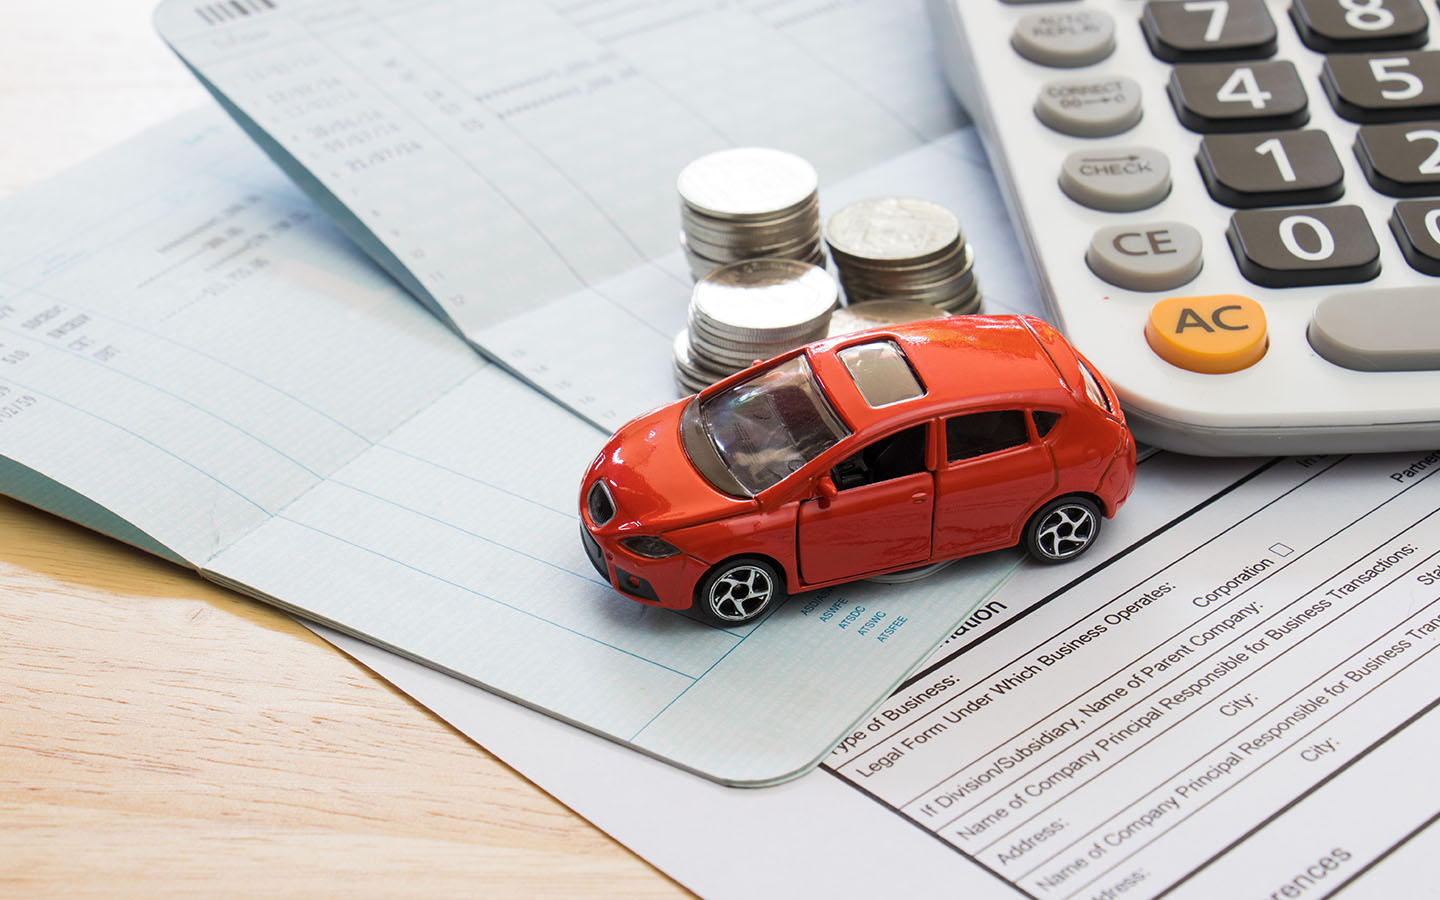 the rates for Luxury and sports car insurance in the UAE are higher than conventional vehicles